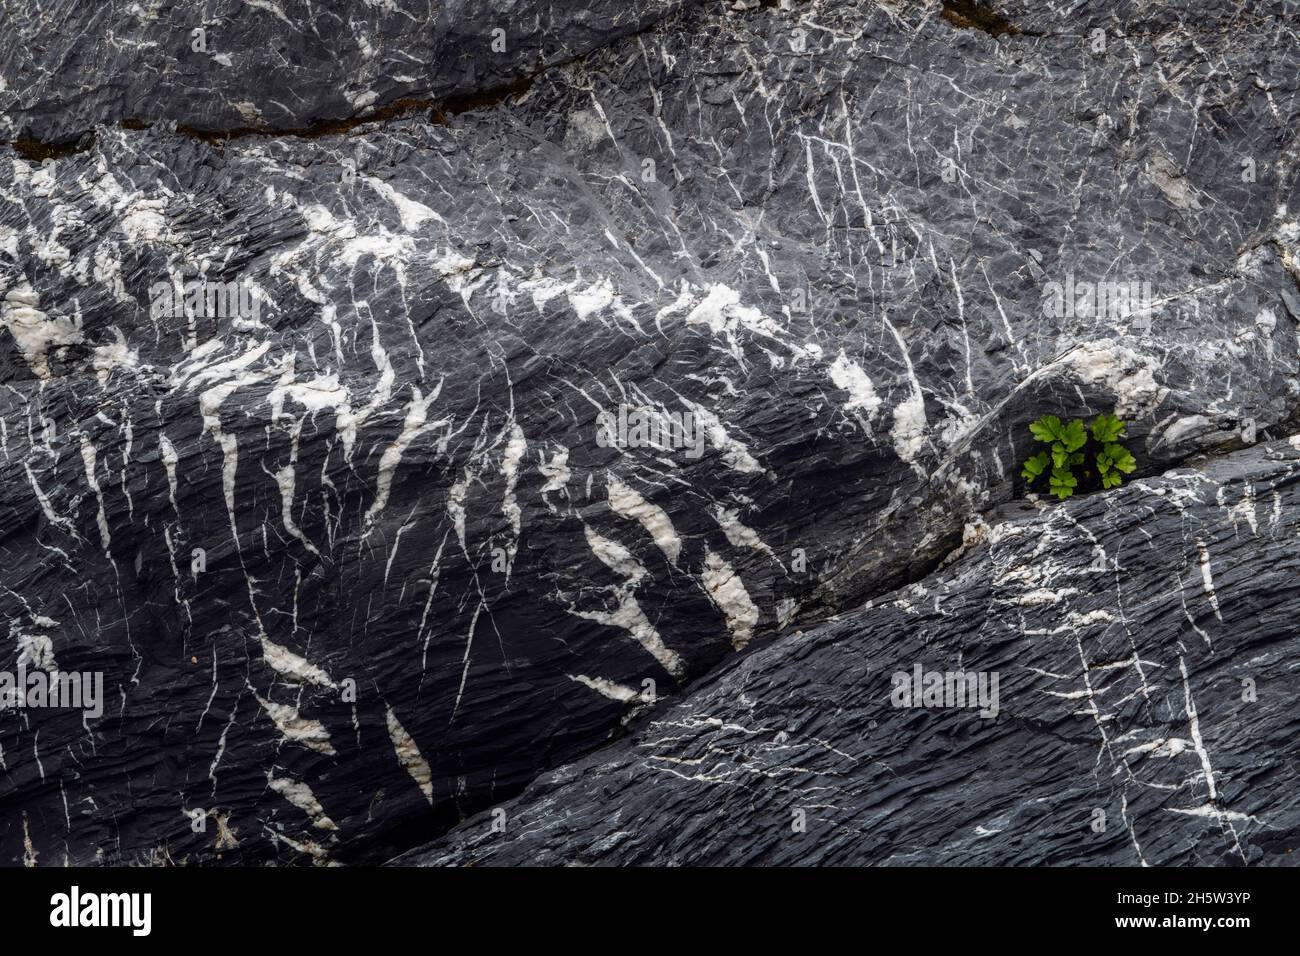 Rock patterns (Quartz and granite) with Beach lovage (Ligusticum scoticum) growing from a crack, St. Lunaire-Griquet, Newfoundland and Labrador NL, Ca Stock Photo